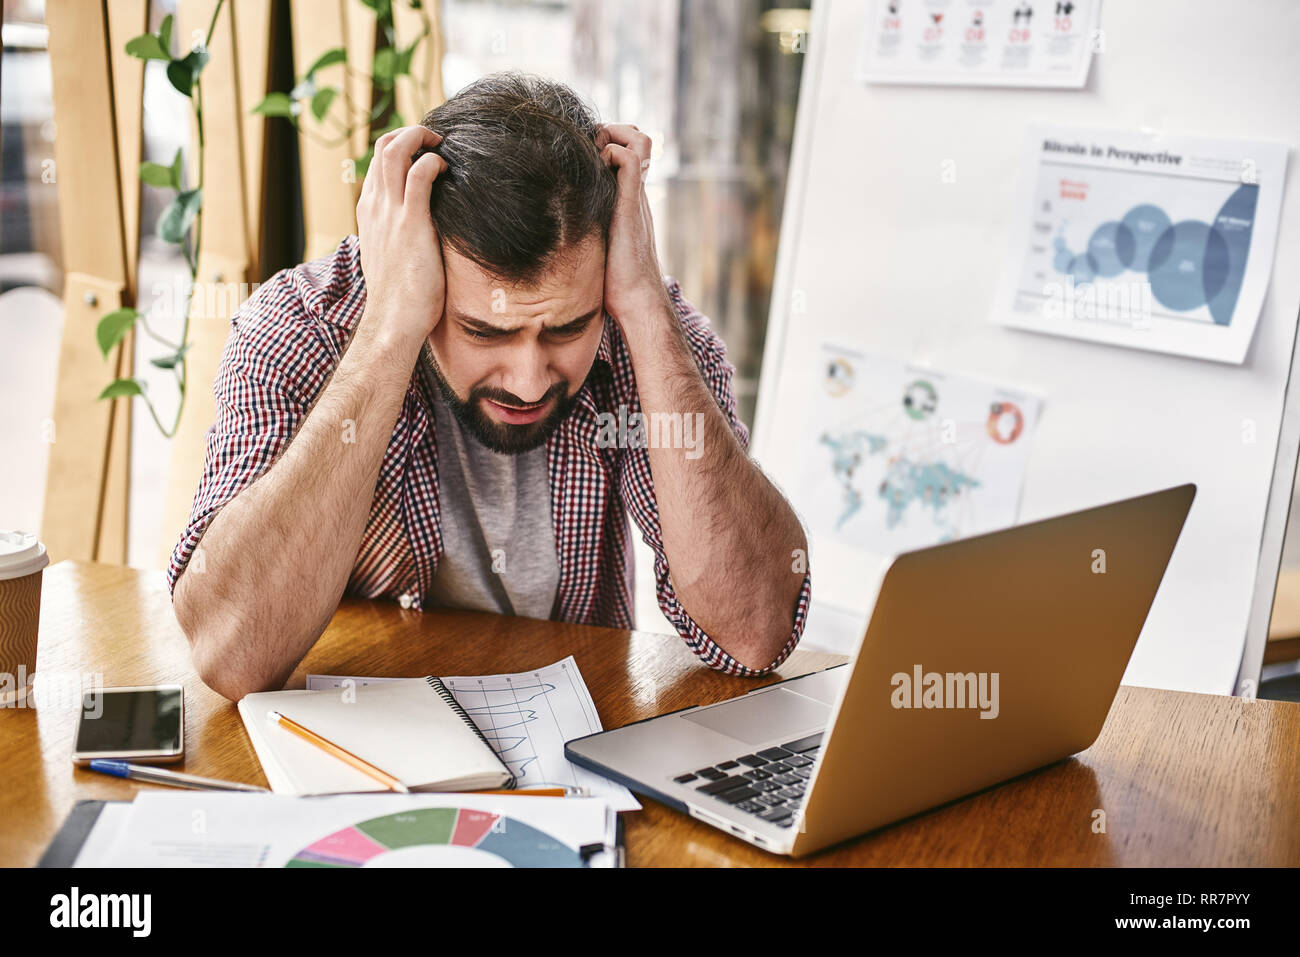 Stressed male employee having computer problem, working in creative office, man experiencing gadget troubles, trying to stay calm, managing emotions, angry worker witness pc breakup Stock Photo